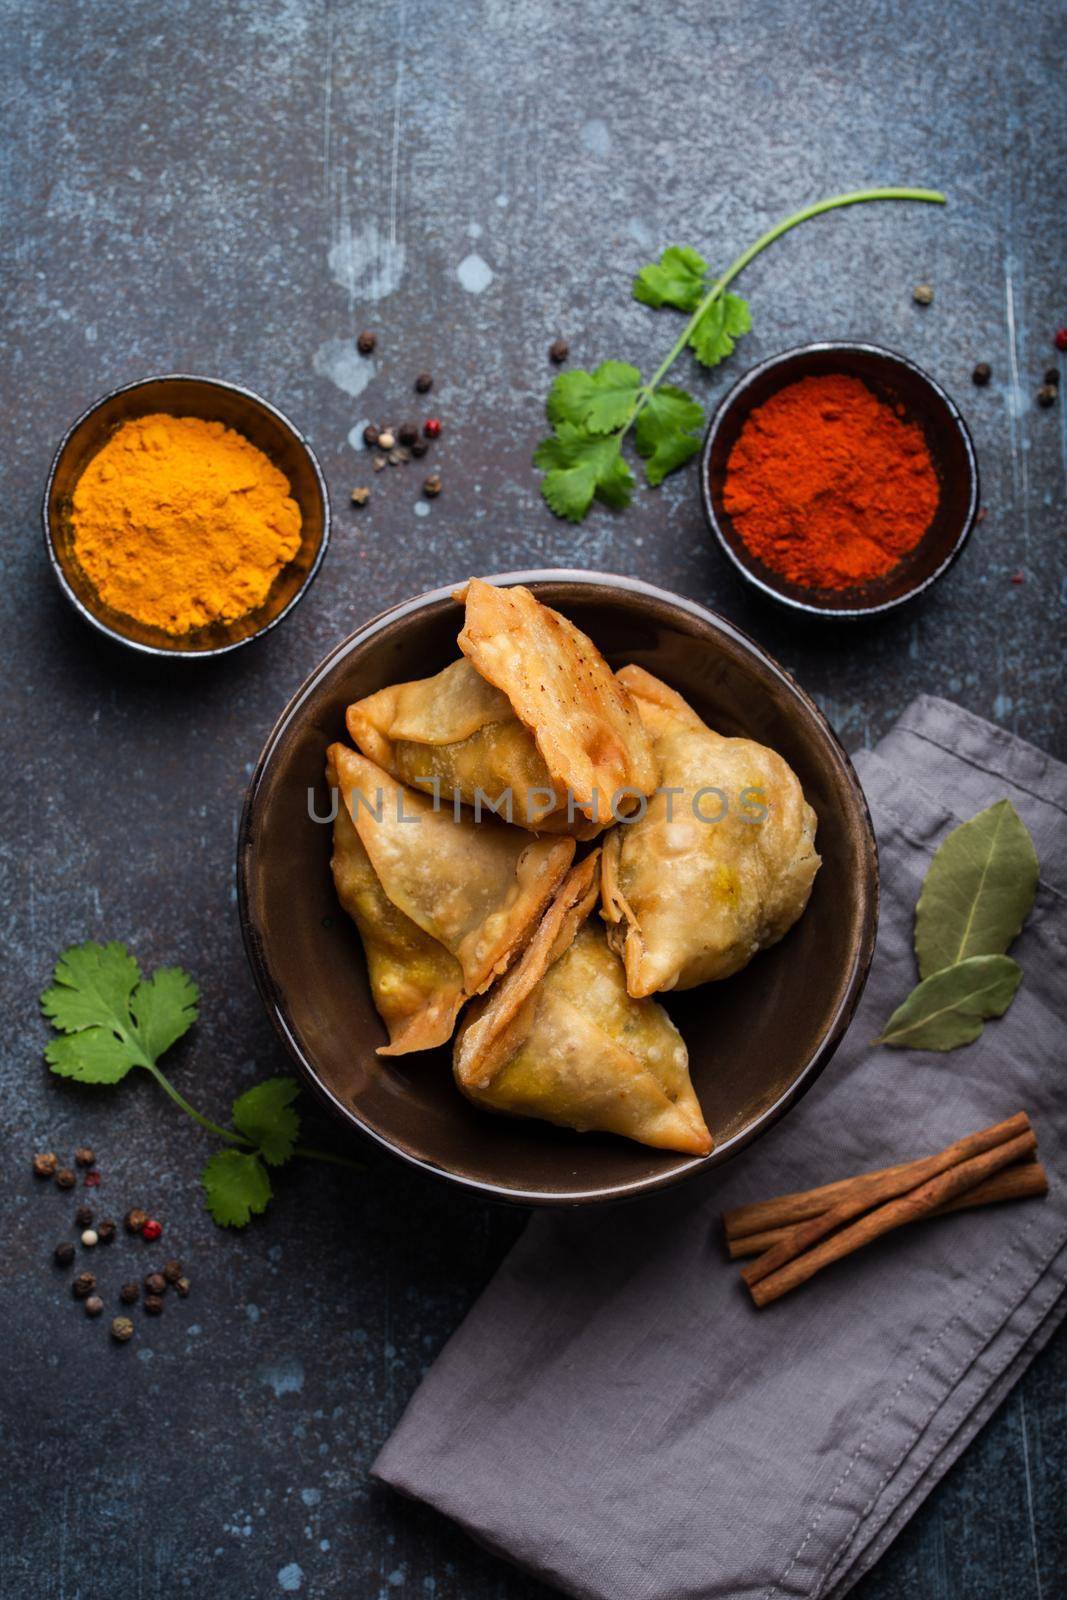 Indian samosas - fried/baked pastry with savoury filling, popular Indian snacks, served in bowl with spices and fresh cilantro on rustic background, top view. Overhead of samosas